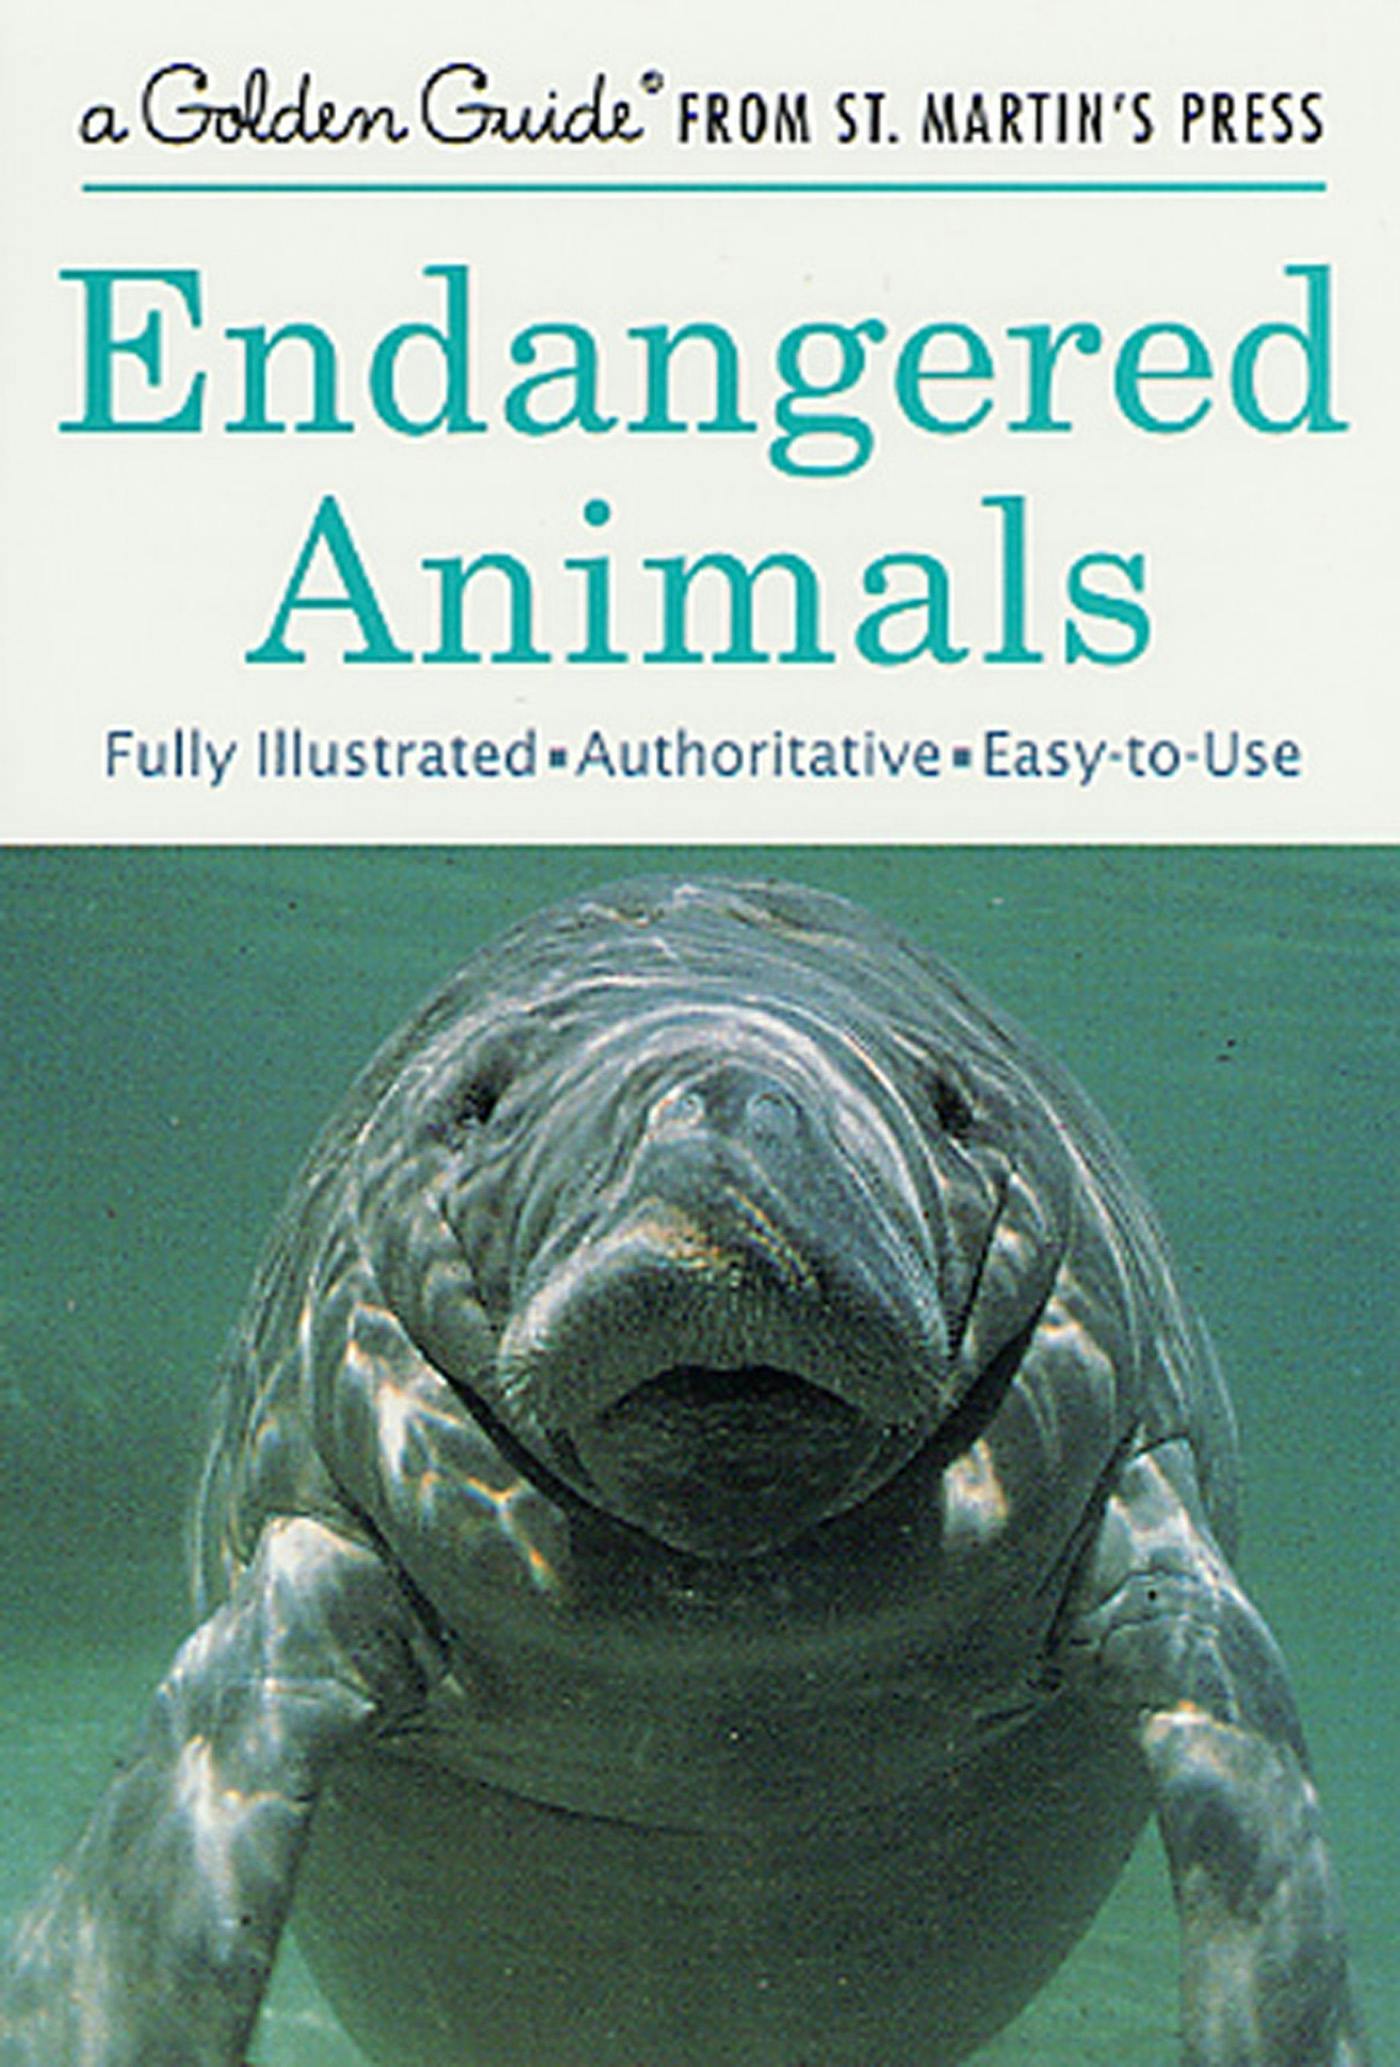 Proof set and book planned for U.S. Endangered Species issue